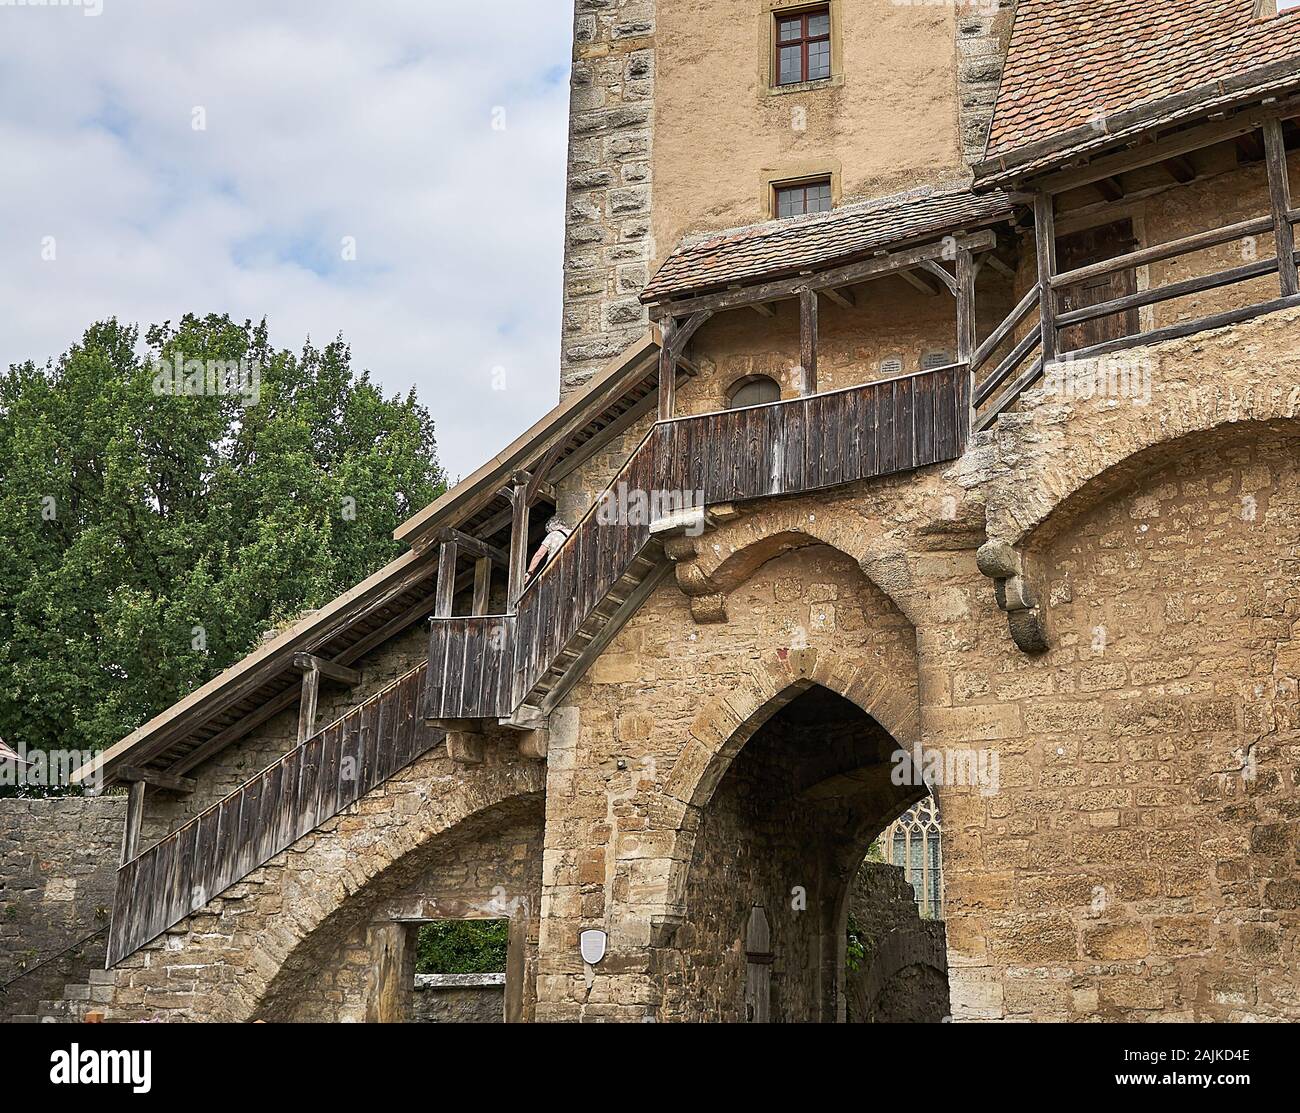 Woman climbs down stairs from the medieval fortification walls that surround the quaint village of Rothenburg ob der Tauber, Germany. Stock Photo